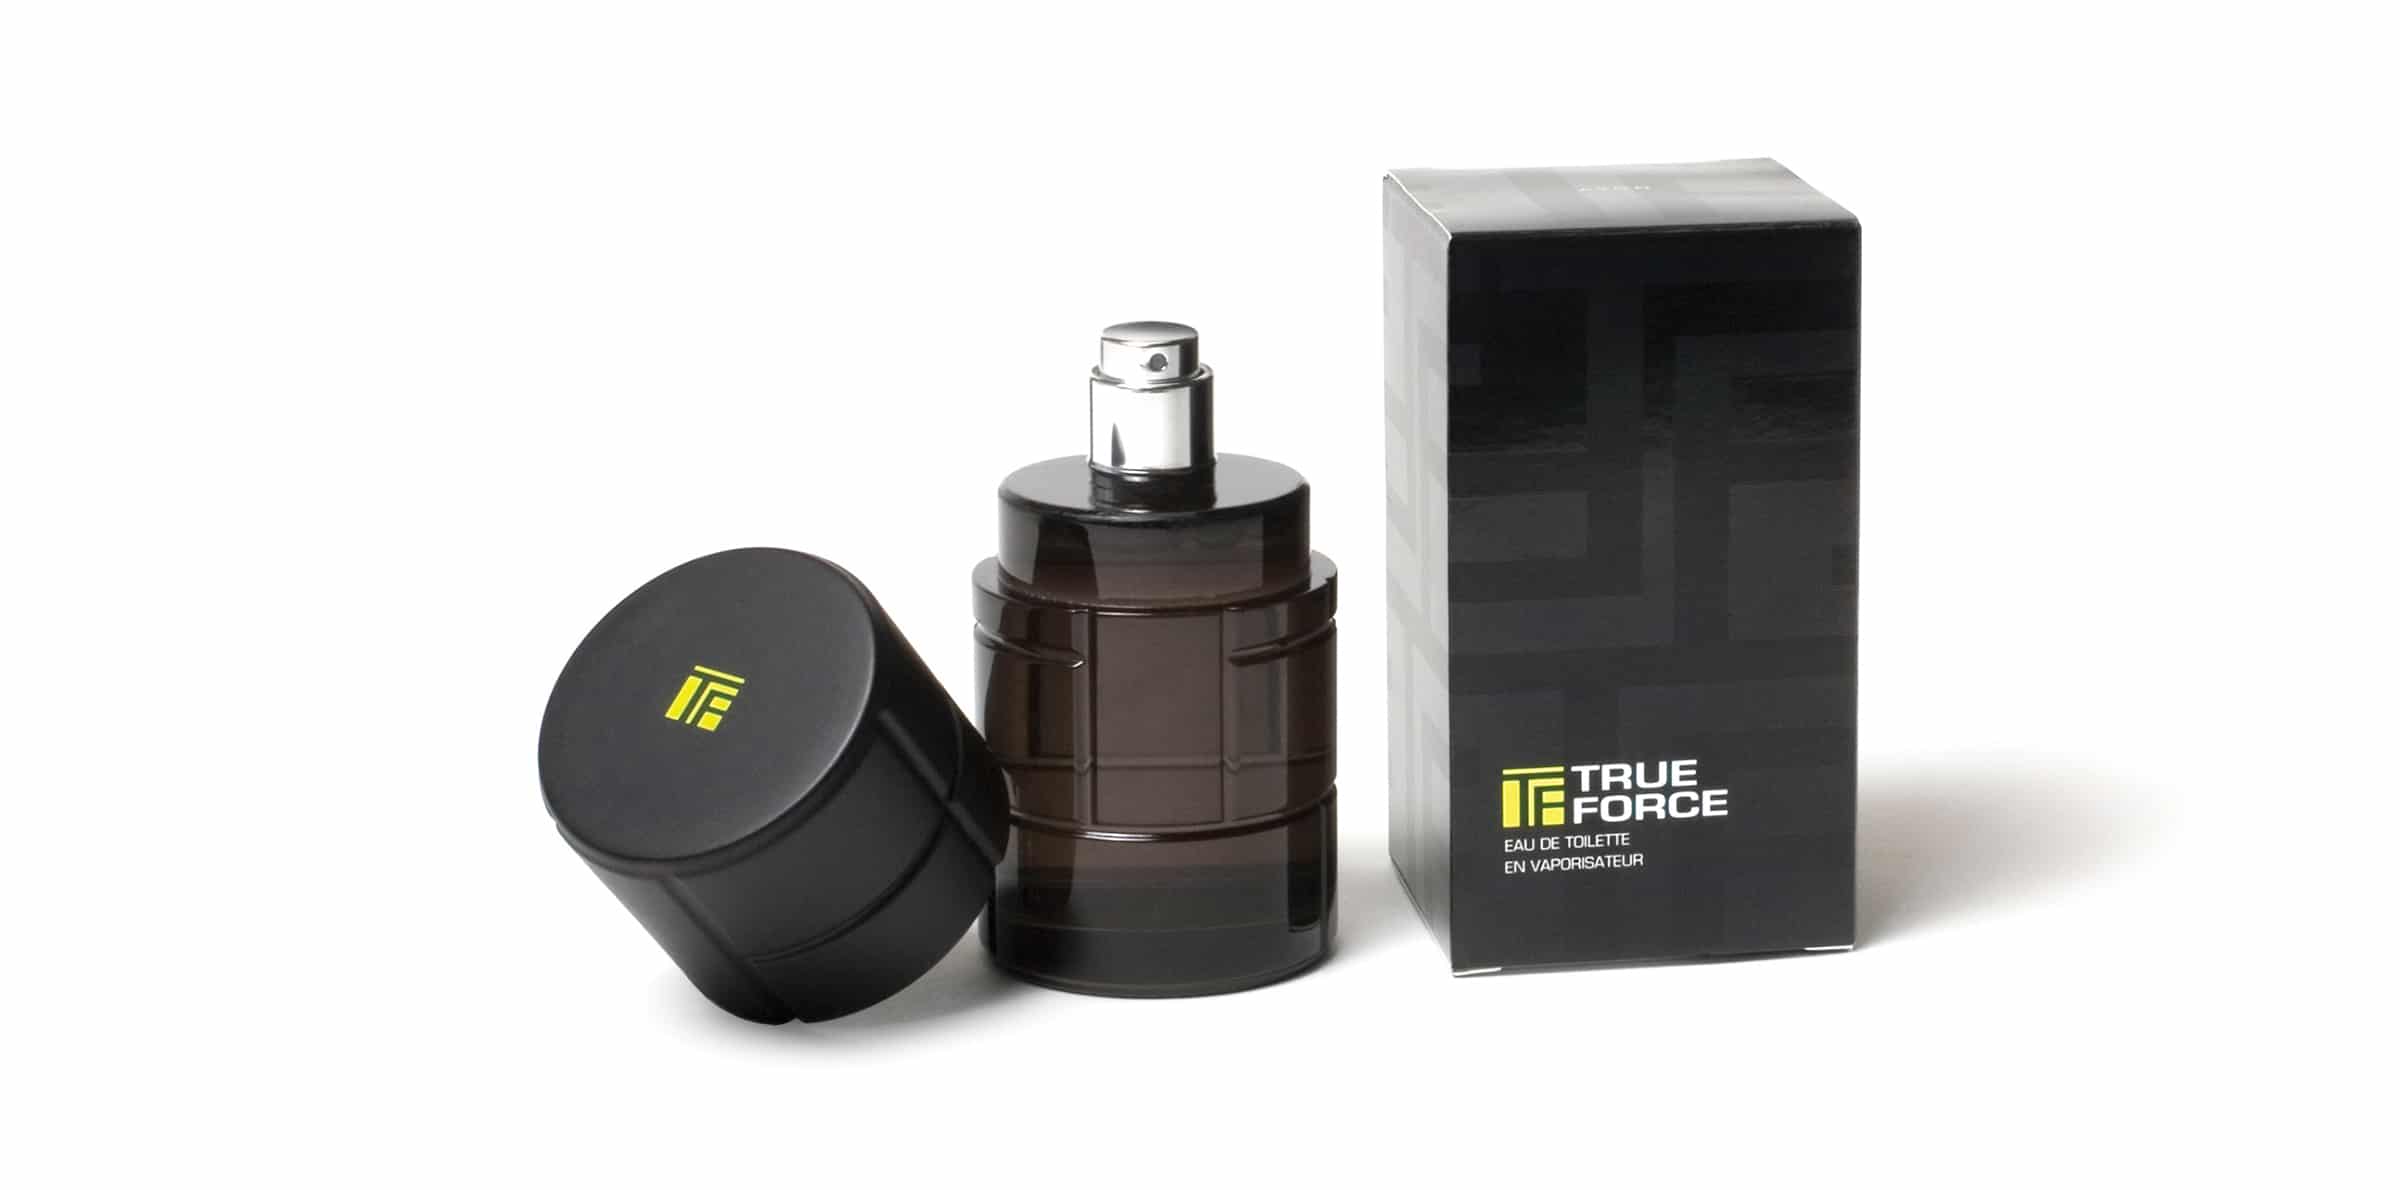 Cologne Packaging: Avon's True Force packaging design with box and fragrance bottle in black packaging and neon green detailing.